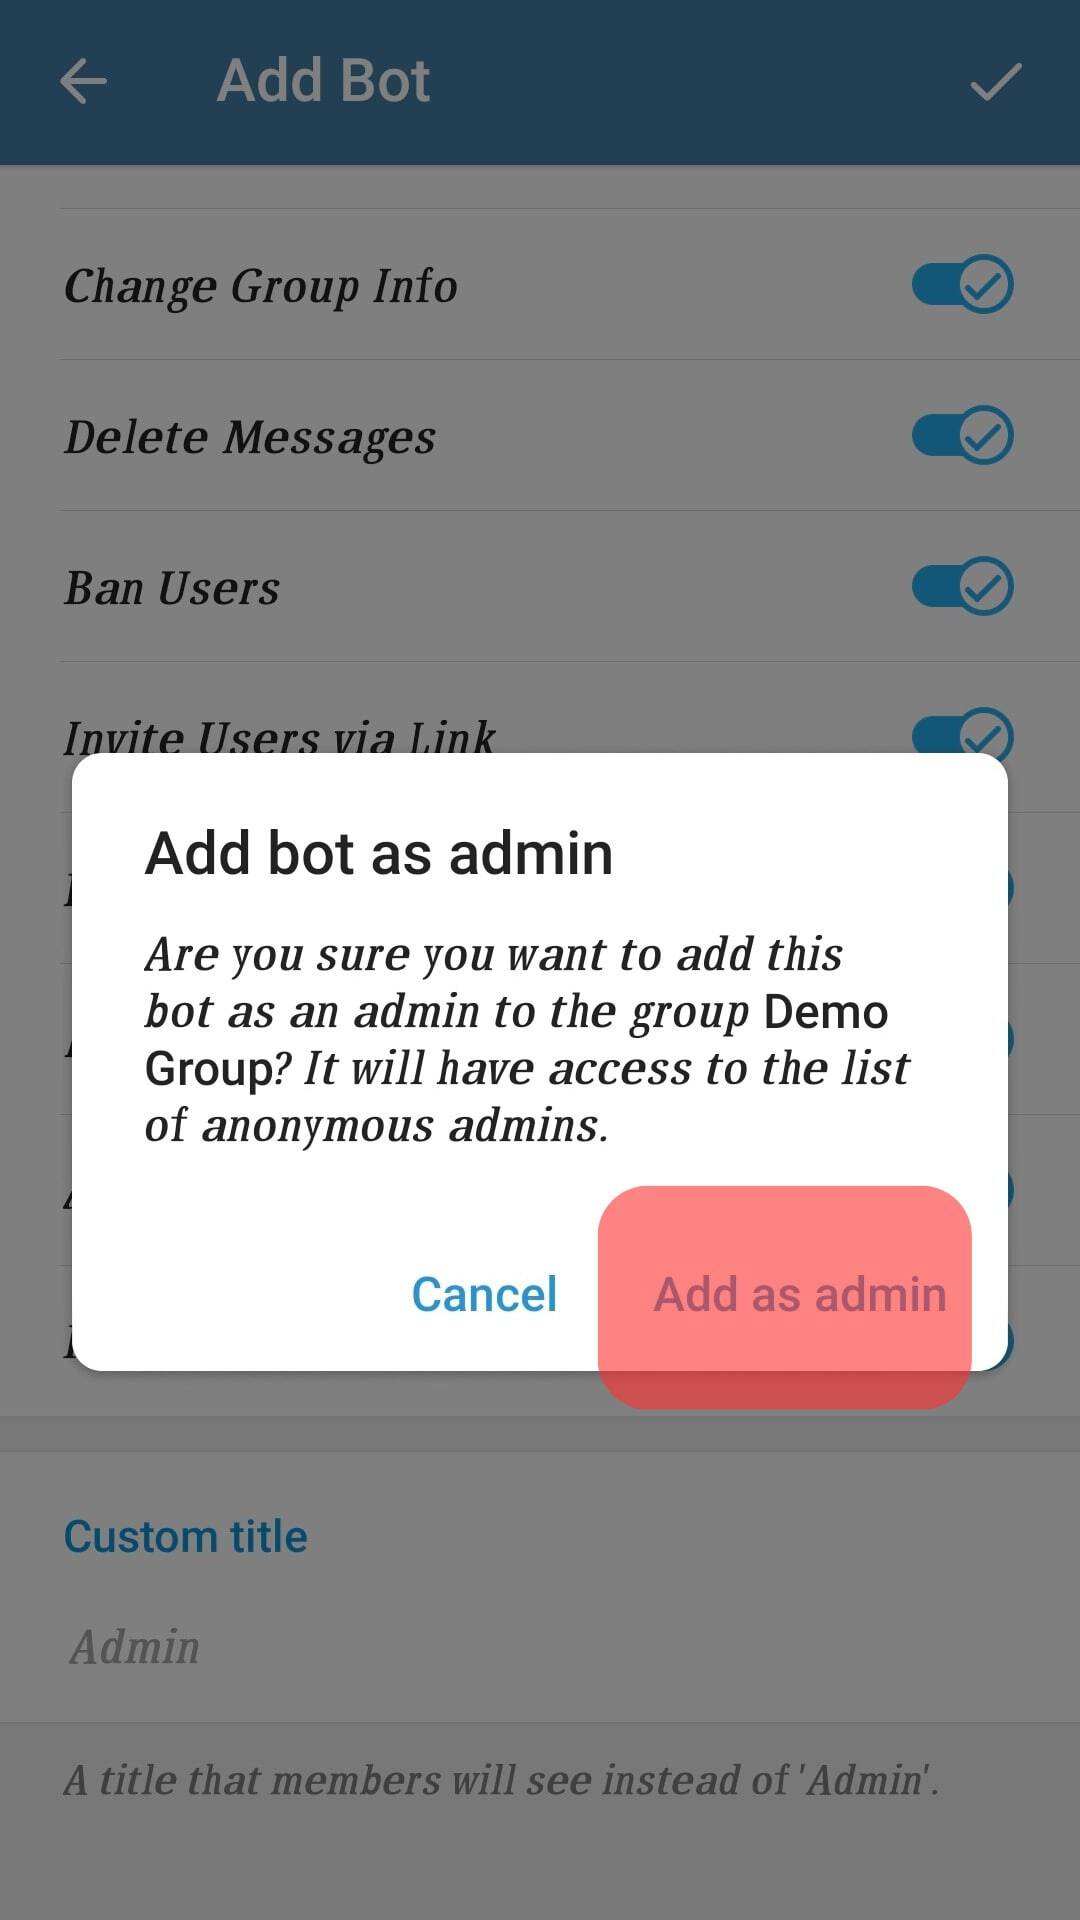 Click Add As Admin To Confirm.